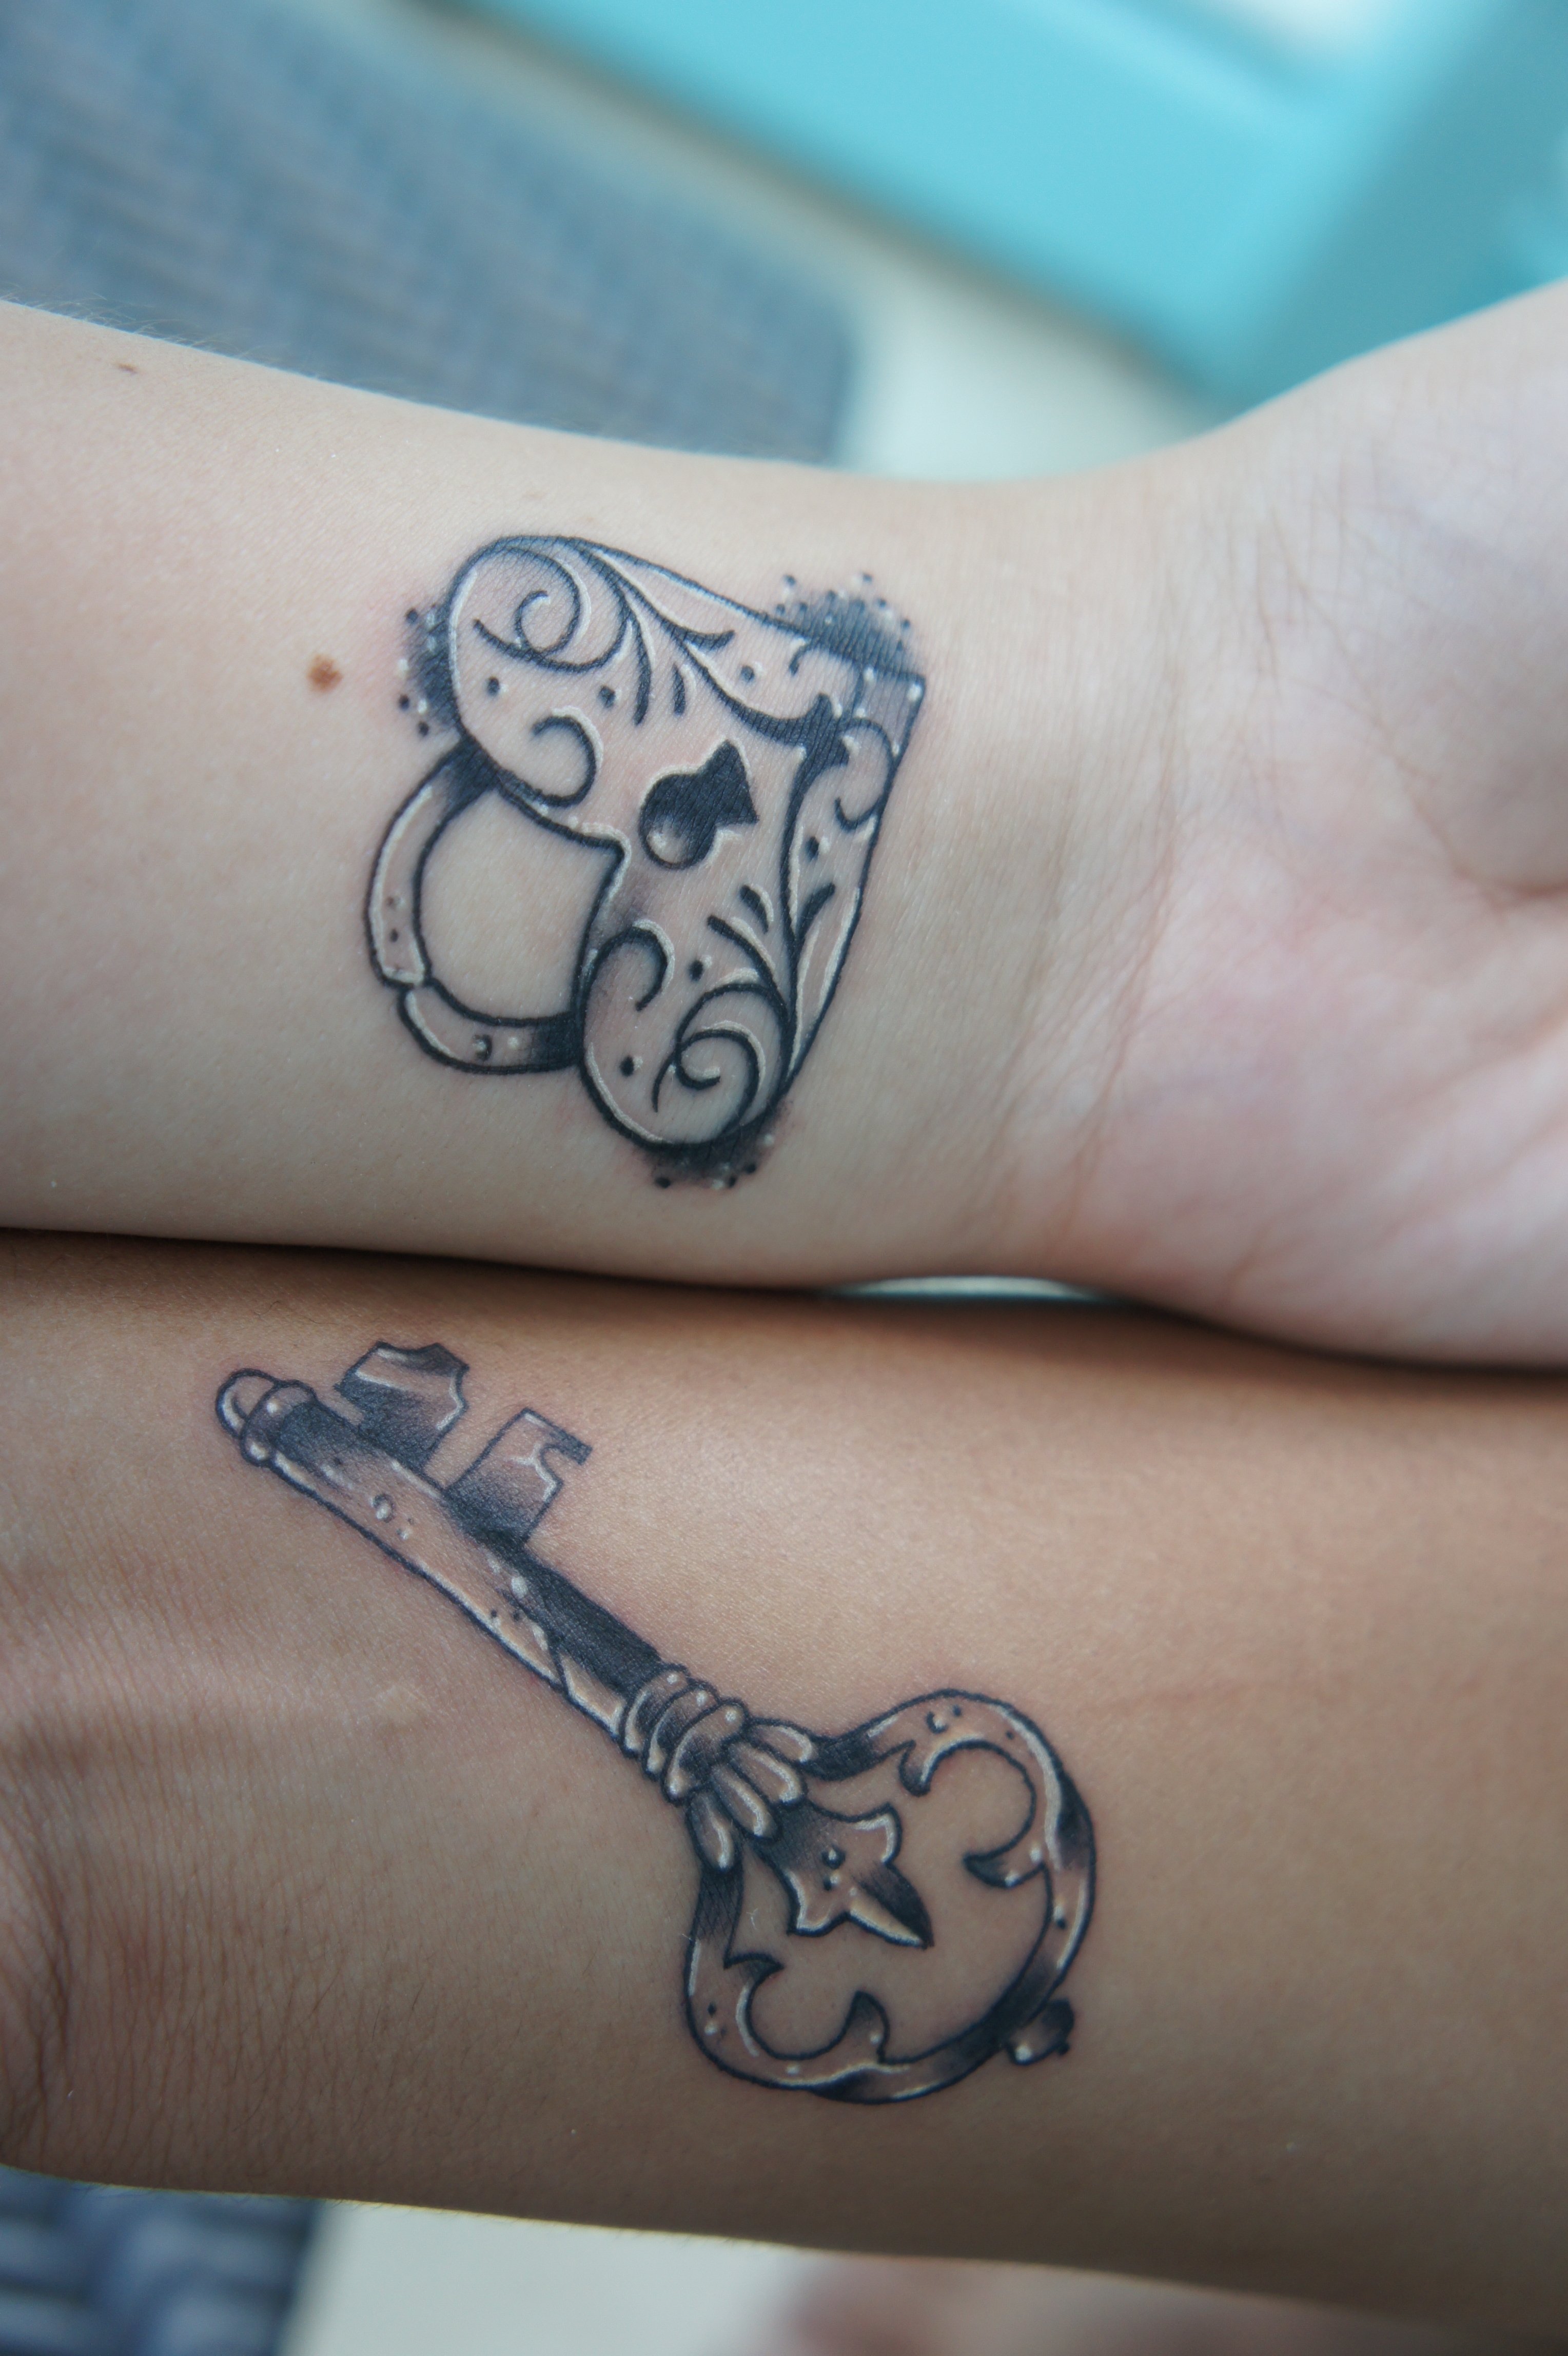 10 Stylish His And Her Matching Tattoos Ideas matching his and hers tattoos ideas amazing tattoo 2 2022